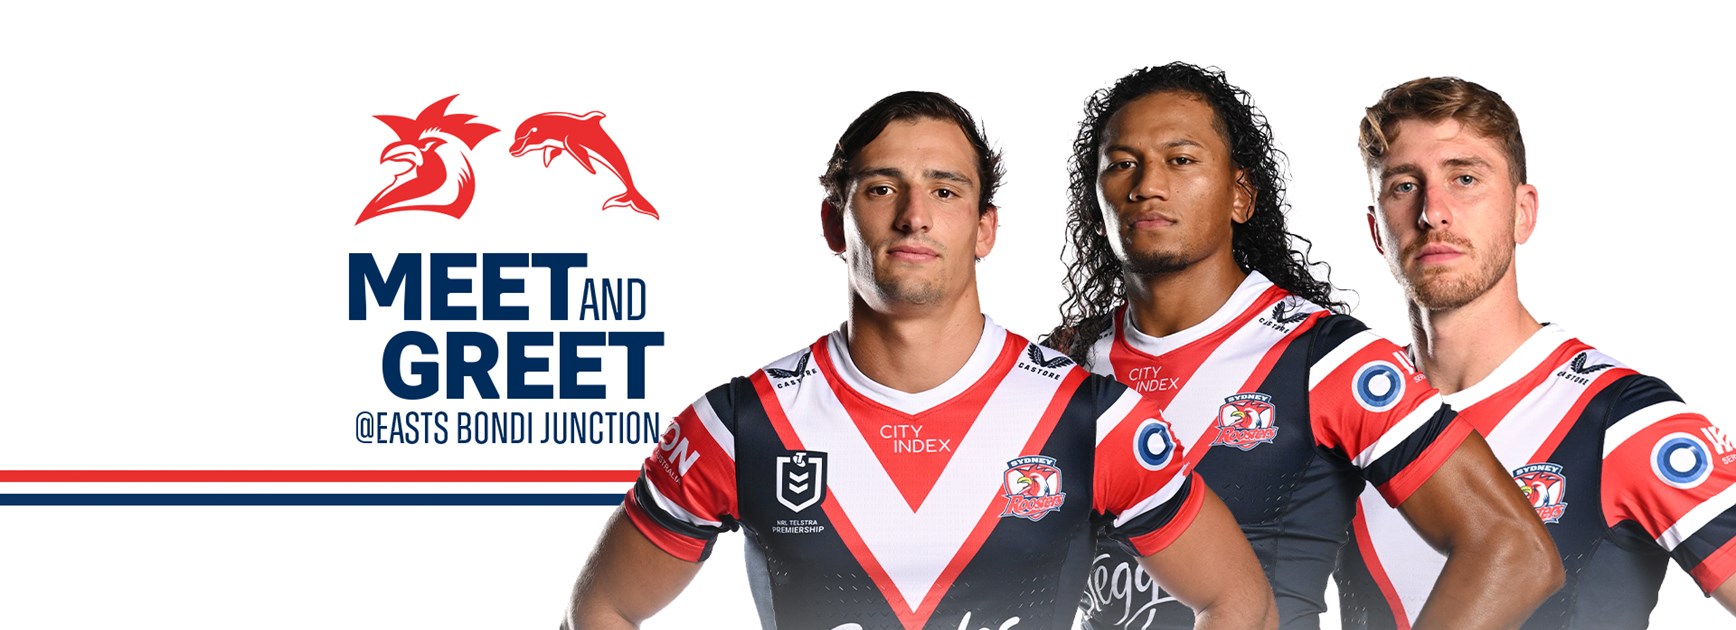 Easts Bondi Junction is Your Place To Be for Sunday's Season Opener